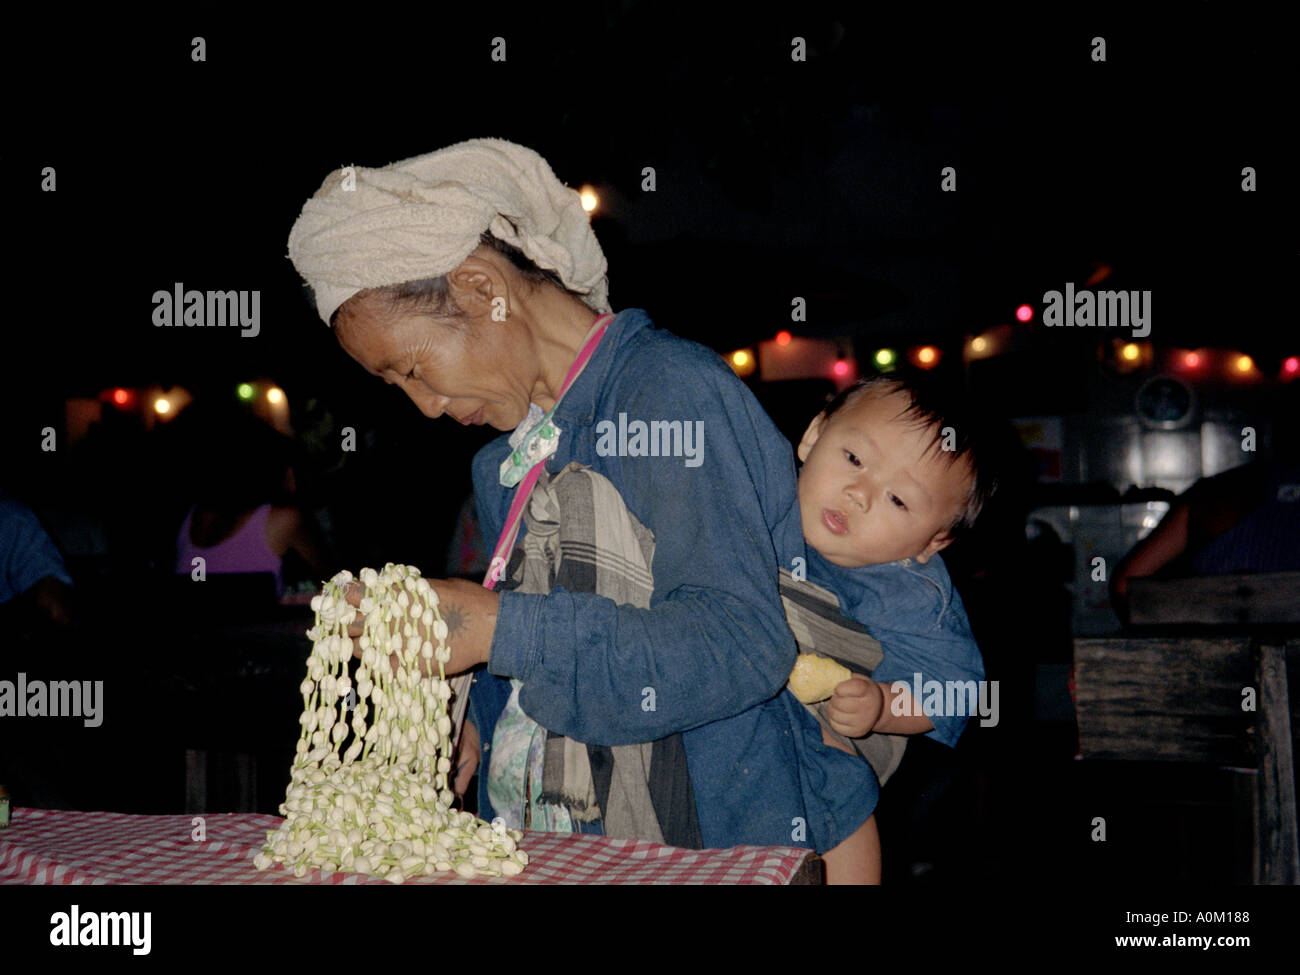 Woman selling flower necklaces in Chang Mai Thailand while carrying a child on her back Stock Photo